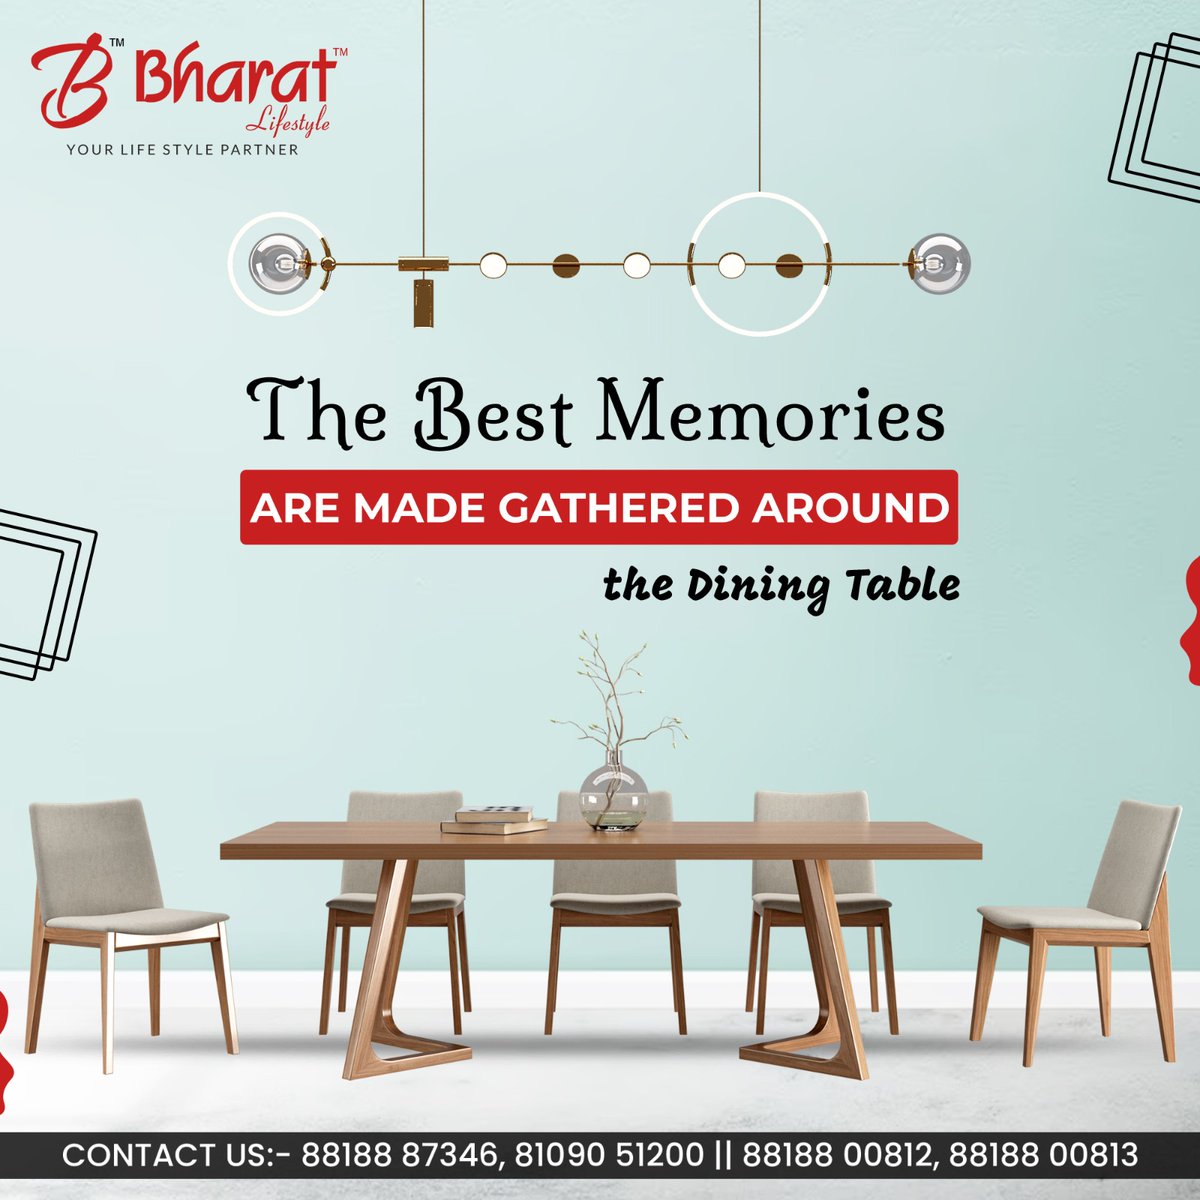 The Best Memories are made gathered around the Dining Table
.
Visit:- bharatlifestylefurniture.com
.
#diningtable #diningroom #diningdecor #diningarea #diningroomdecor #diningtabledecor #diningchairs #diningtableset #diningroominspo #diningtablestyling #indore